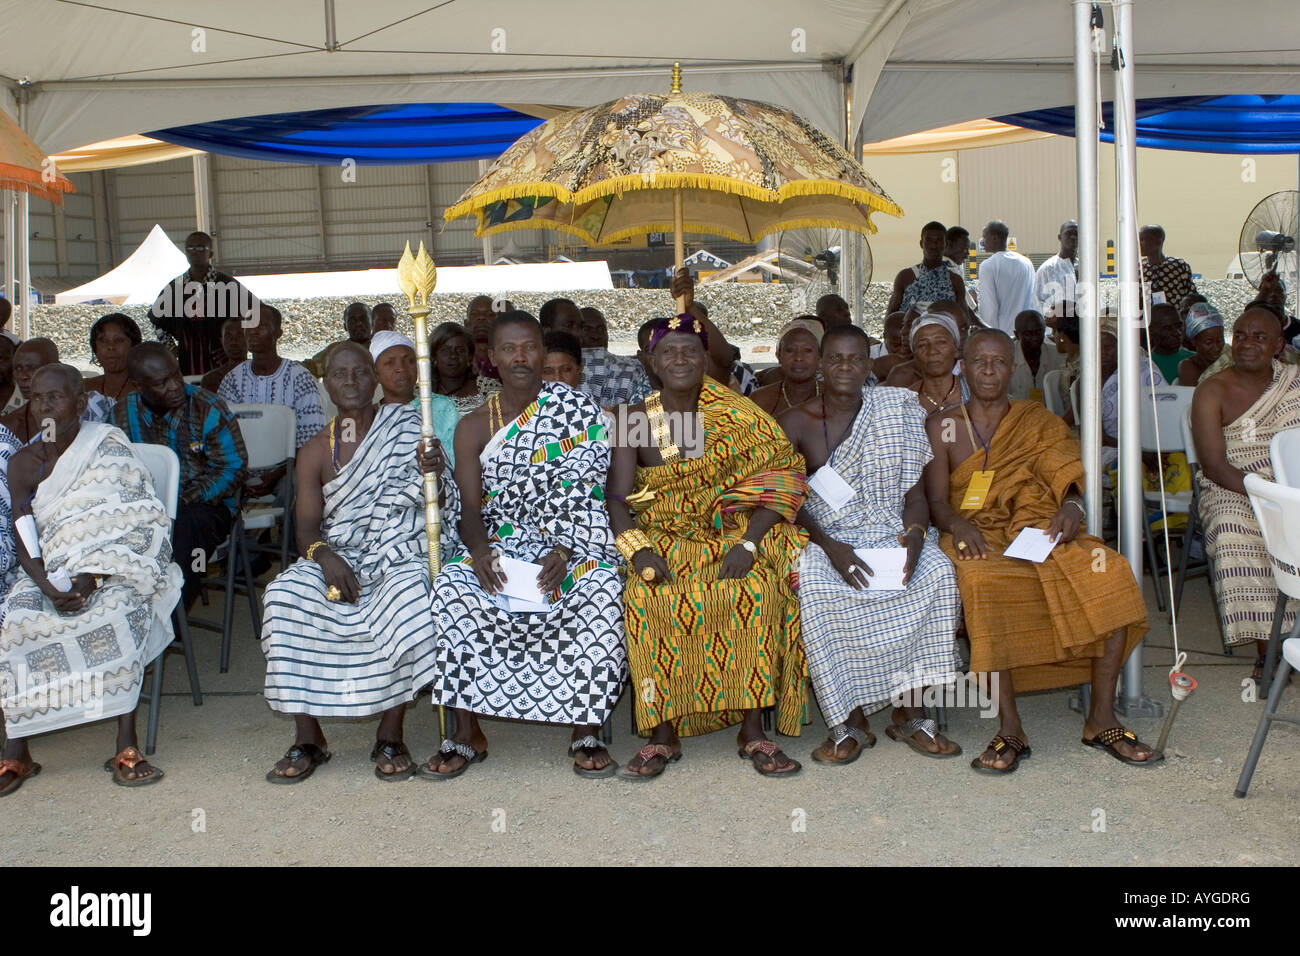 Ashanti Chief, linguist with staff, elders and retinue seated and assembled for a celebration, Western Ghana Stock Photo